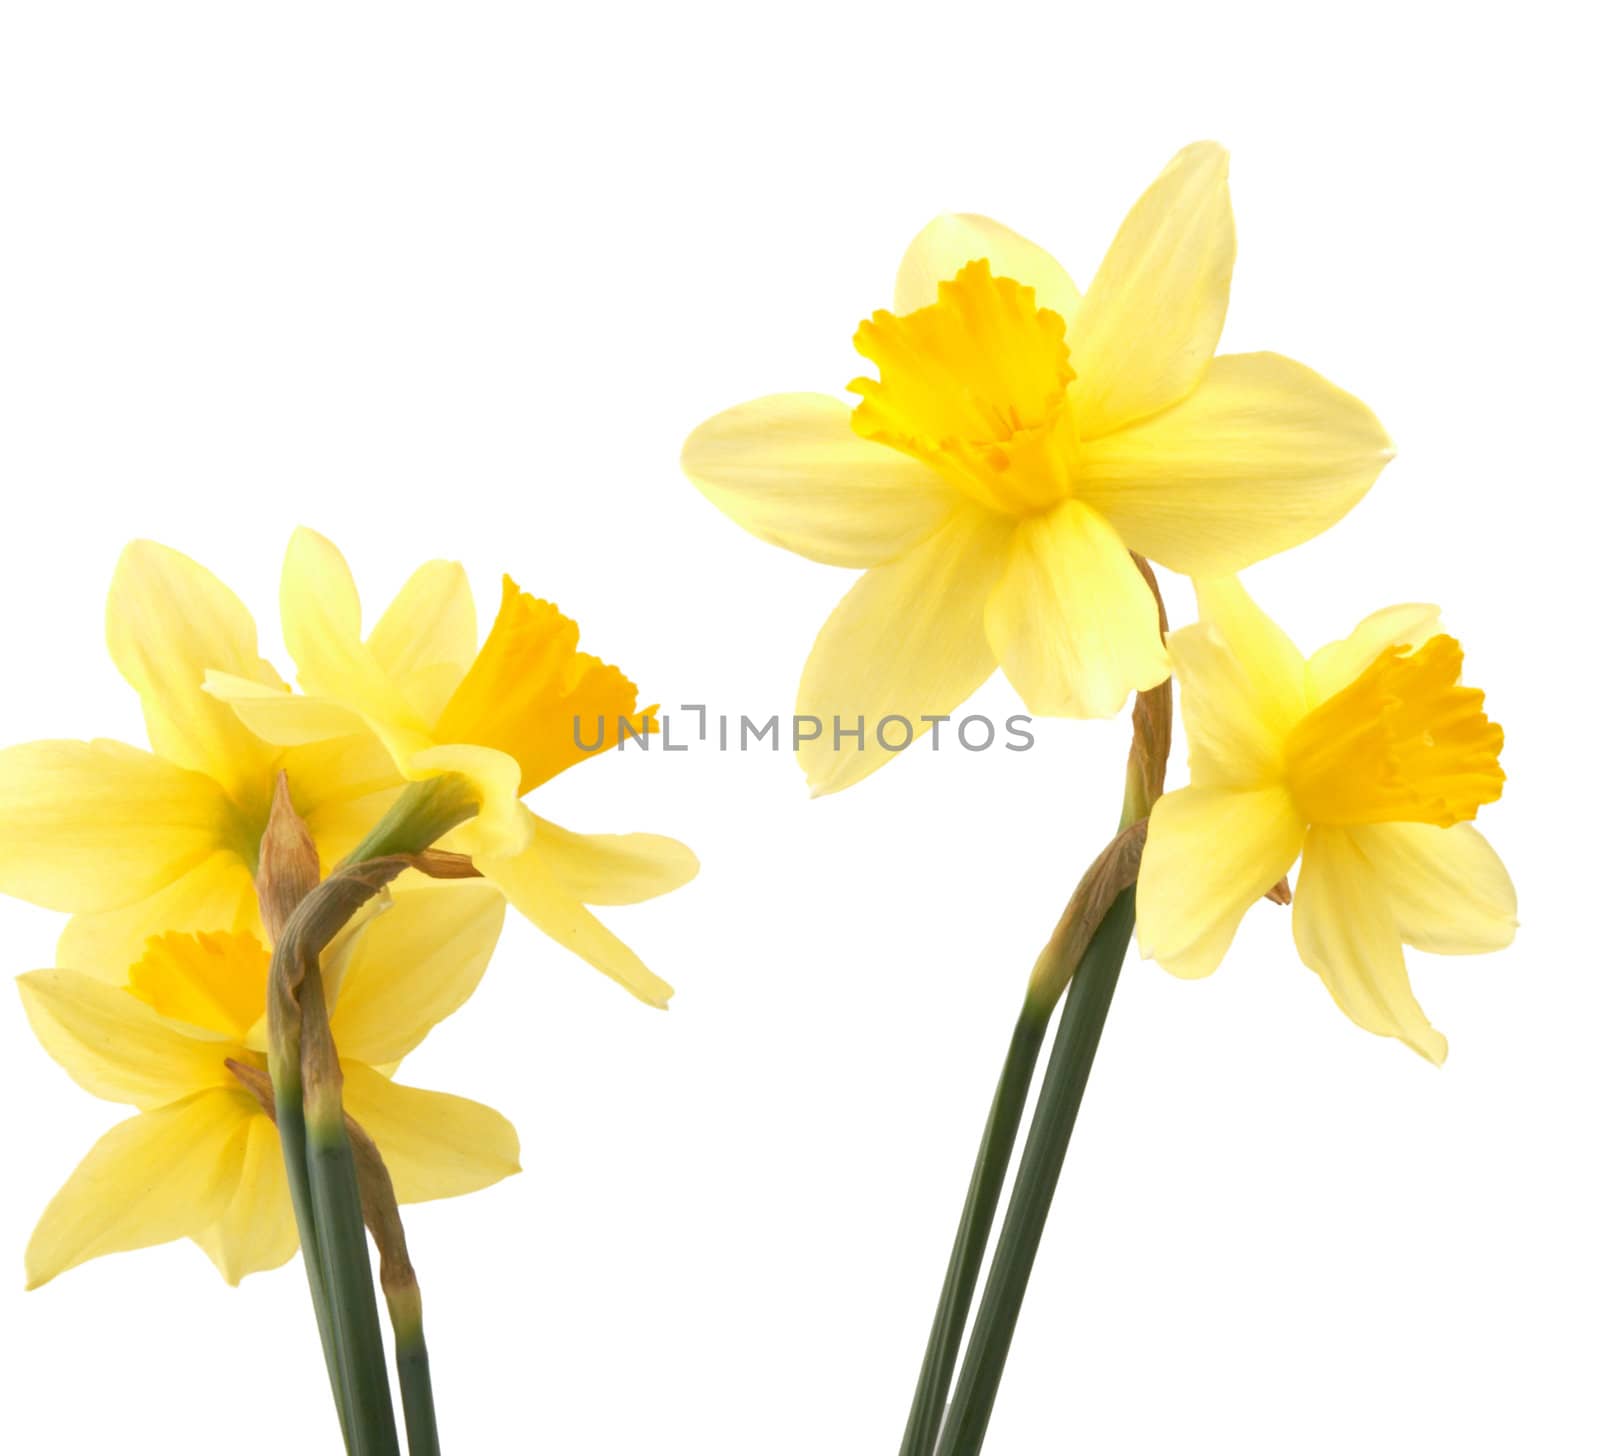 Spring flowers - narcissuses by holligan78